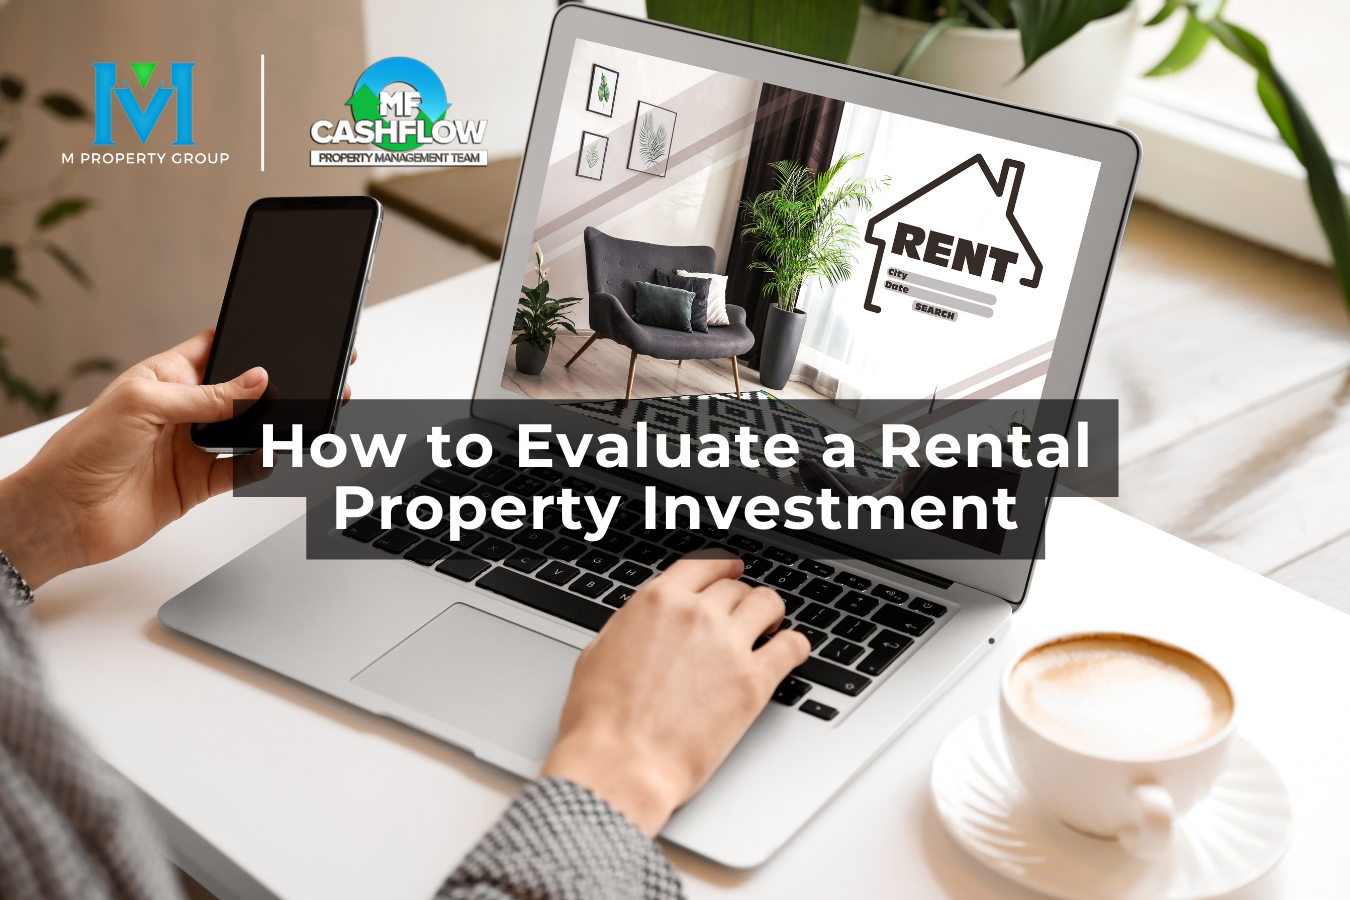 How to Evaluate a Rental Property Investment